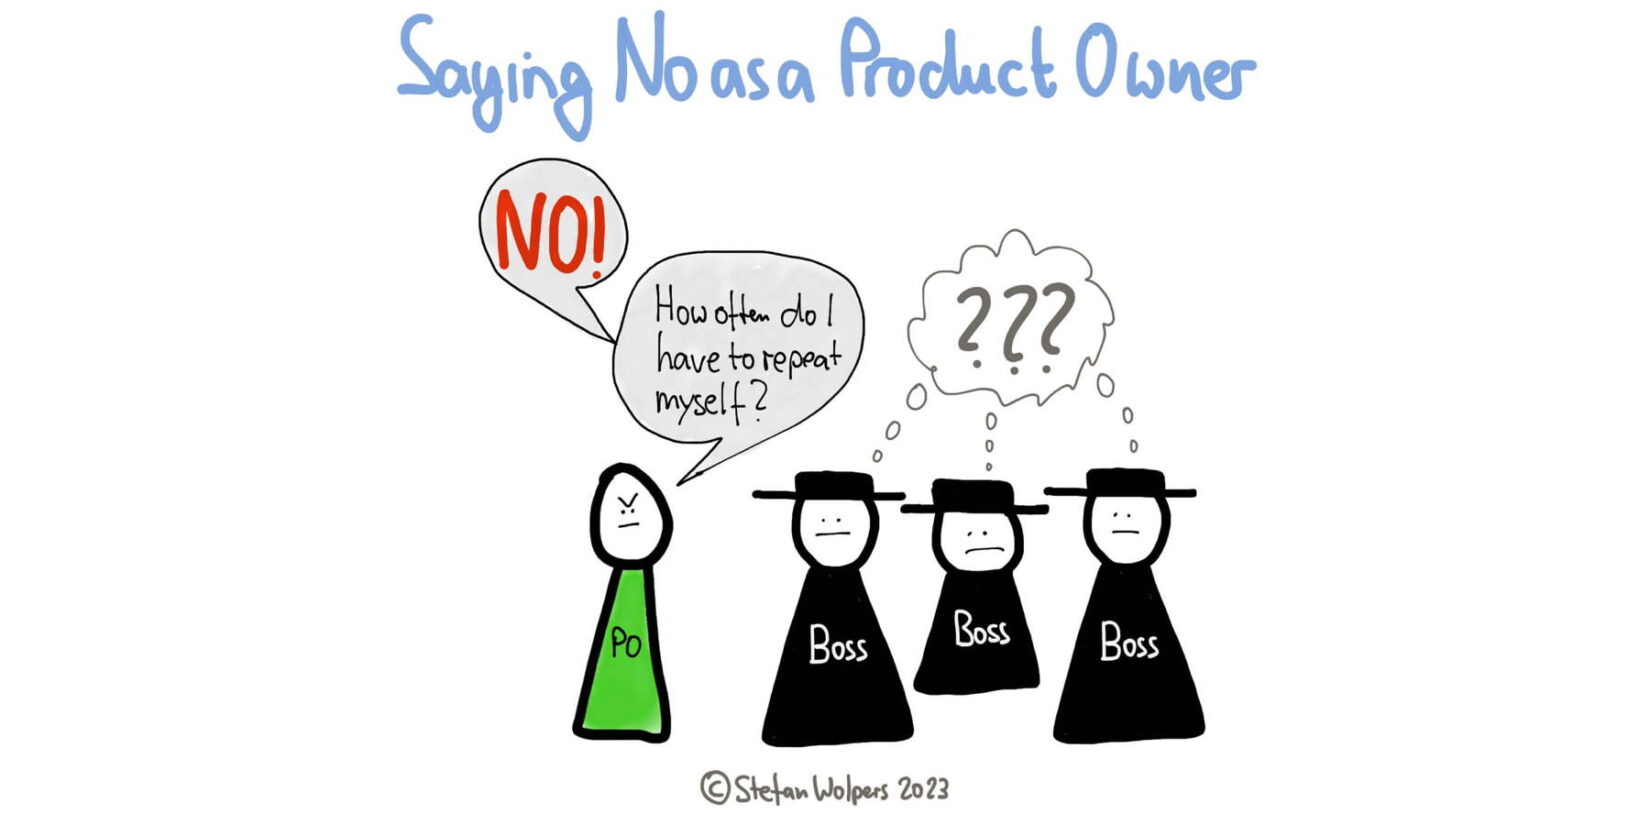 Saying No as a Product Owner or Product Manager — Age-of-Product.com